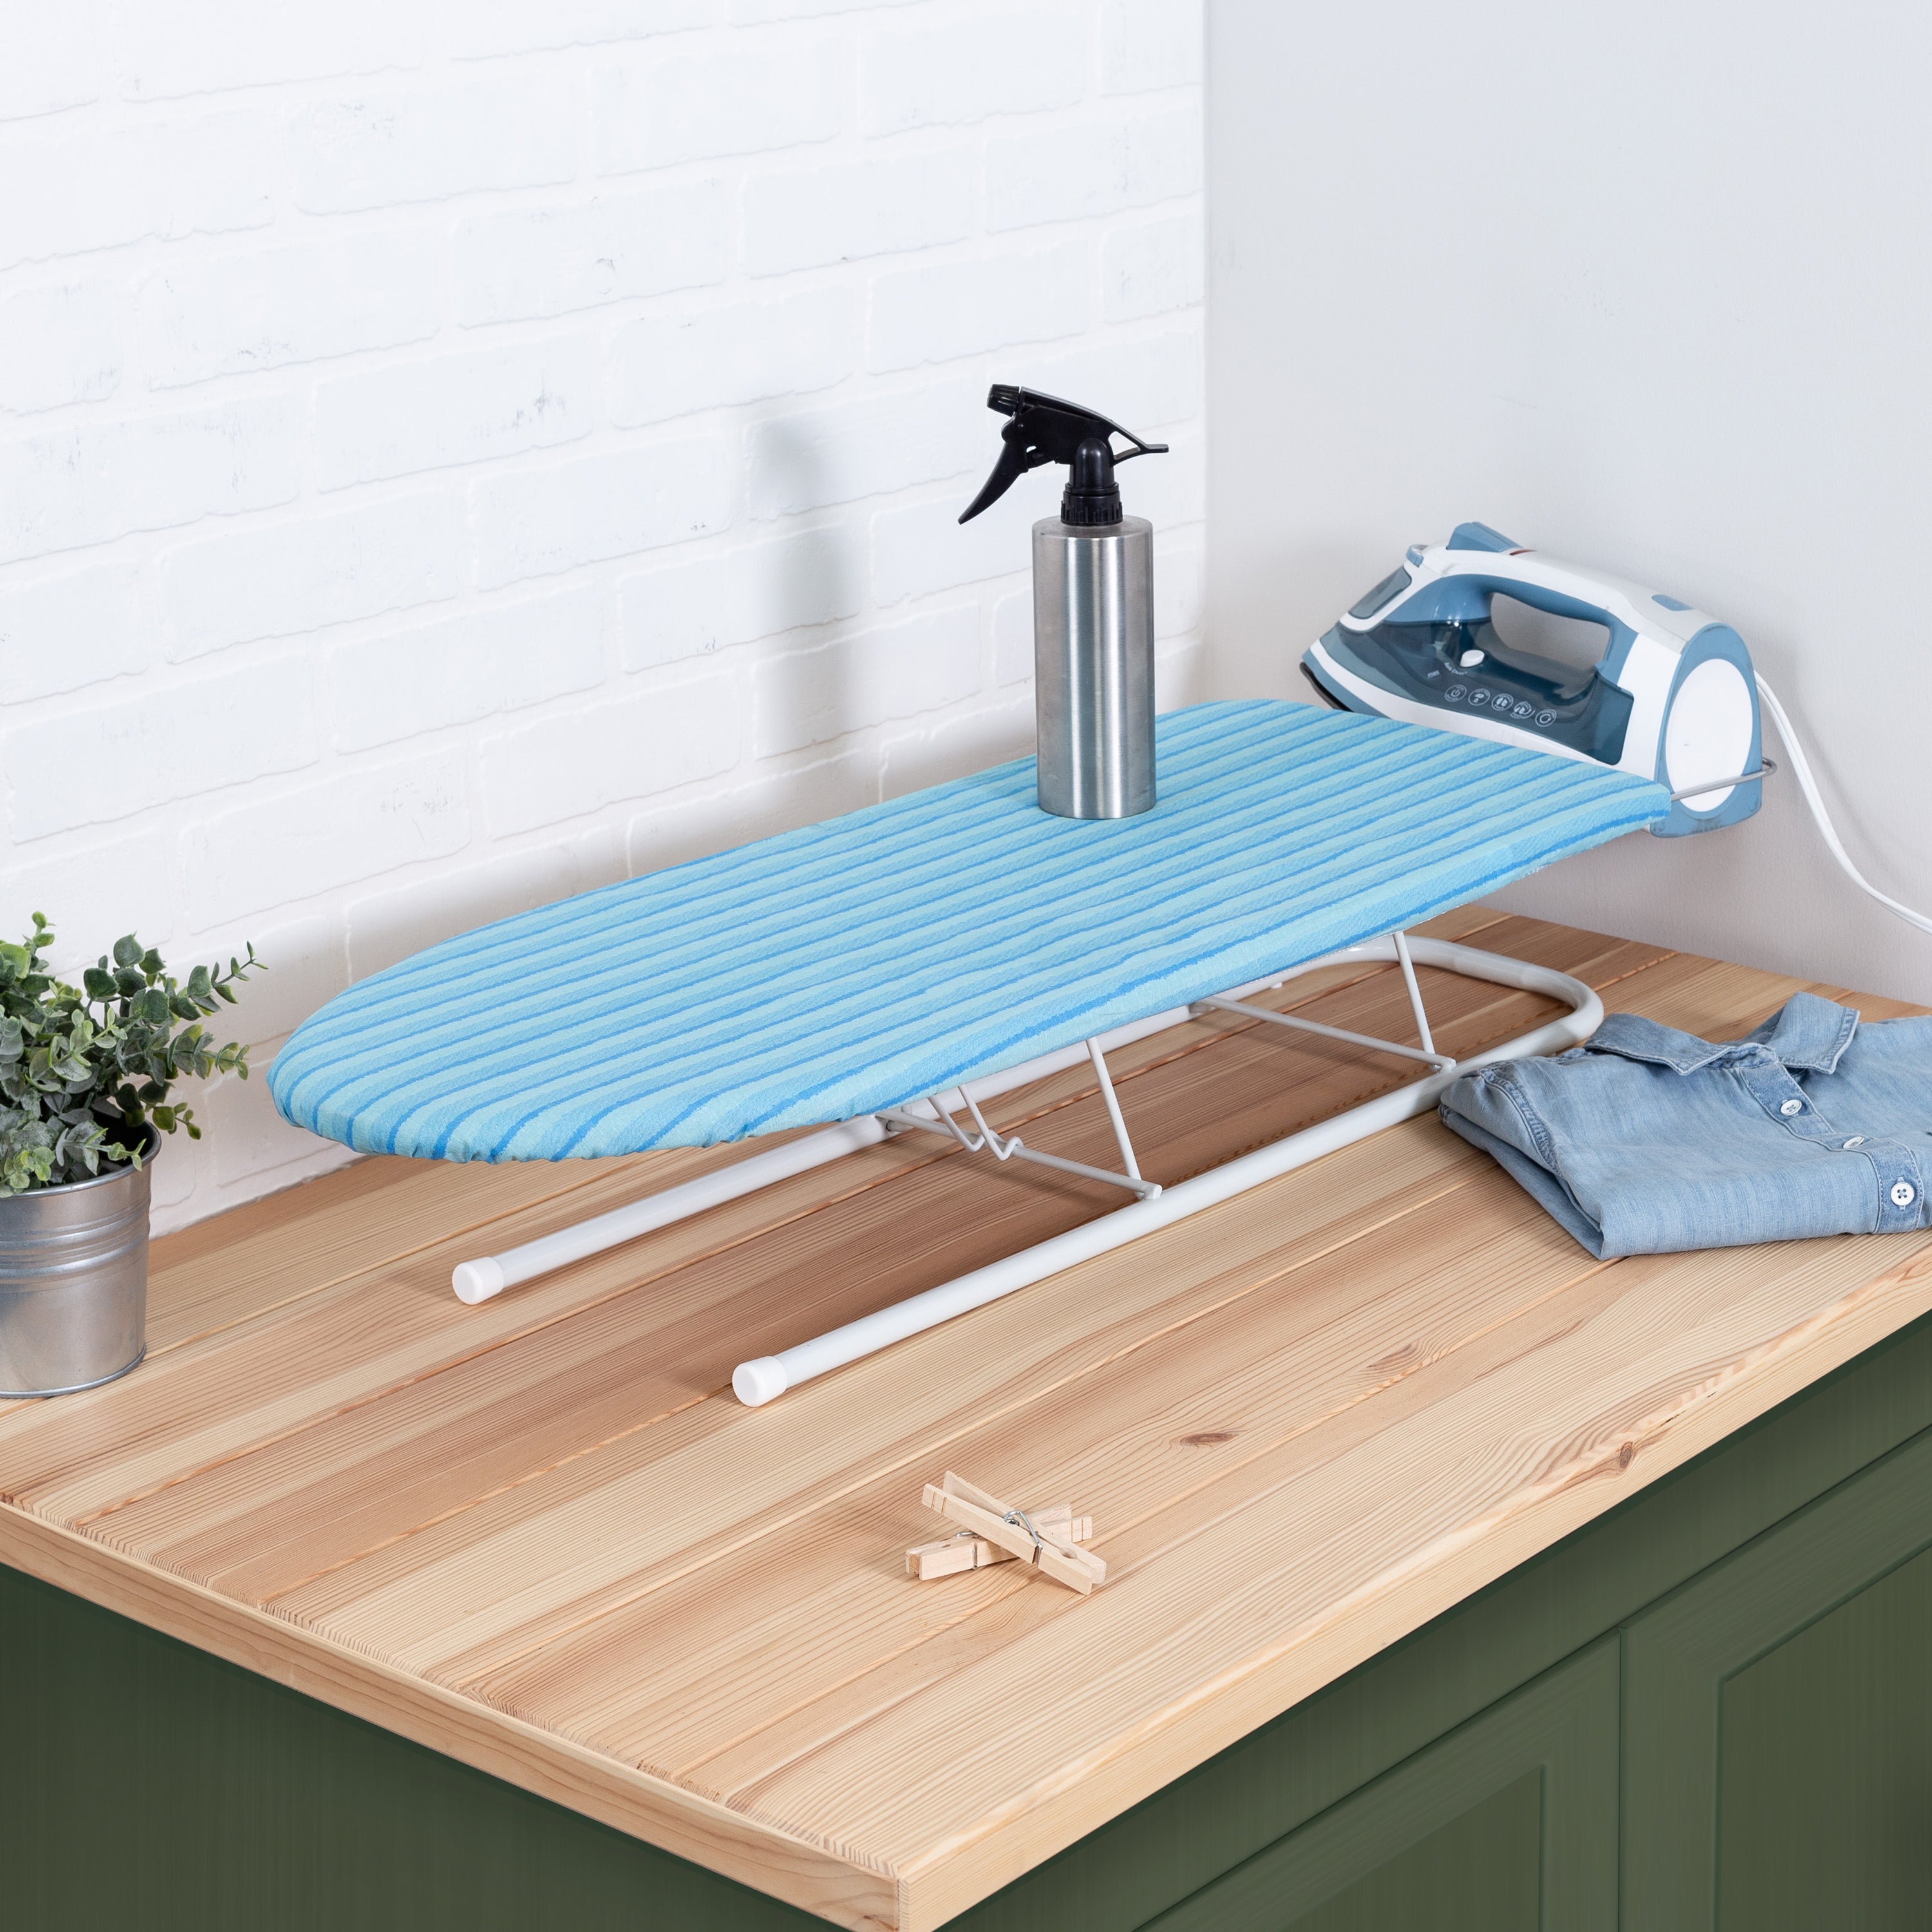  Sunbeam Ironing Board with Rest,Blue : Home & Kitchen